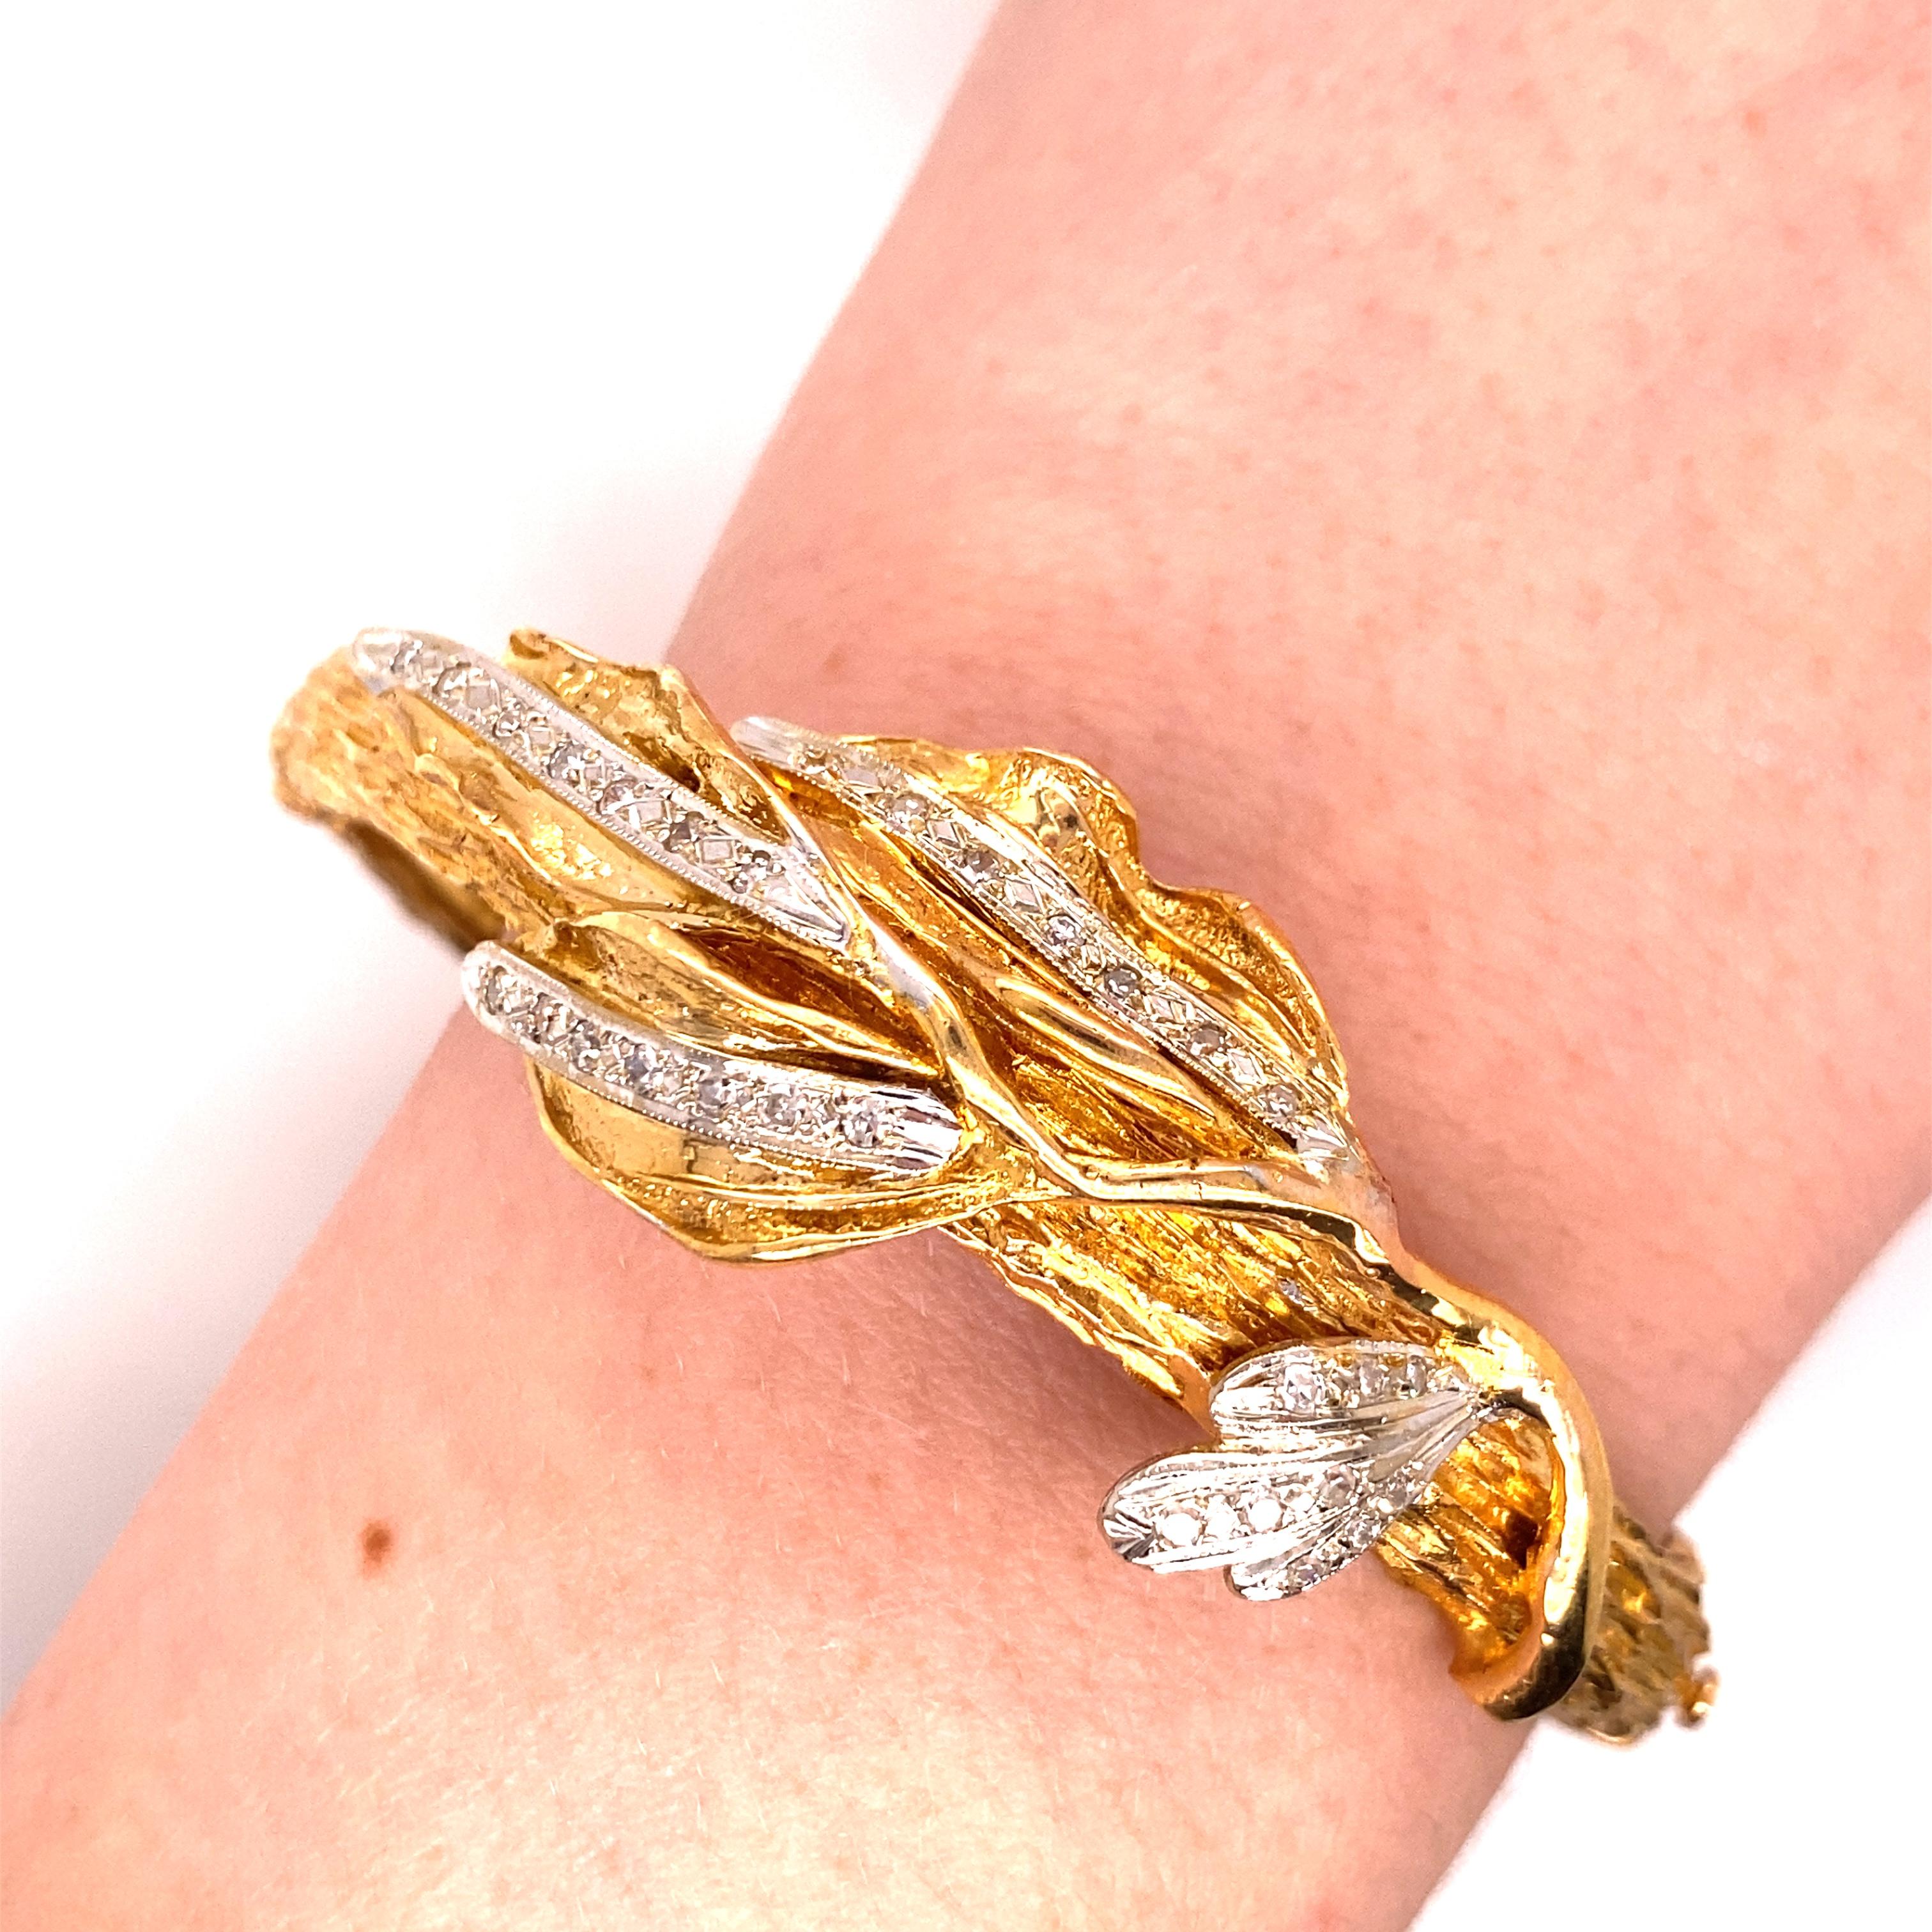 Vintage 18K Yellow Gold Diamond Leaf Bangle - There are 30 single cut diamonds bead set in white gold in the leafs with a total approximate weight of .50ct with H - I color VS - SI clarity. The bangle is made of solid casted pieces and measures 7mm